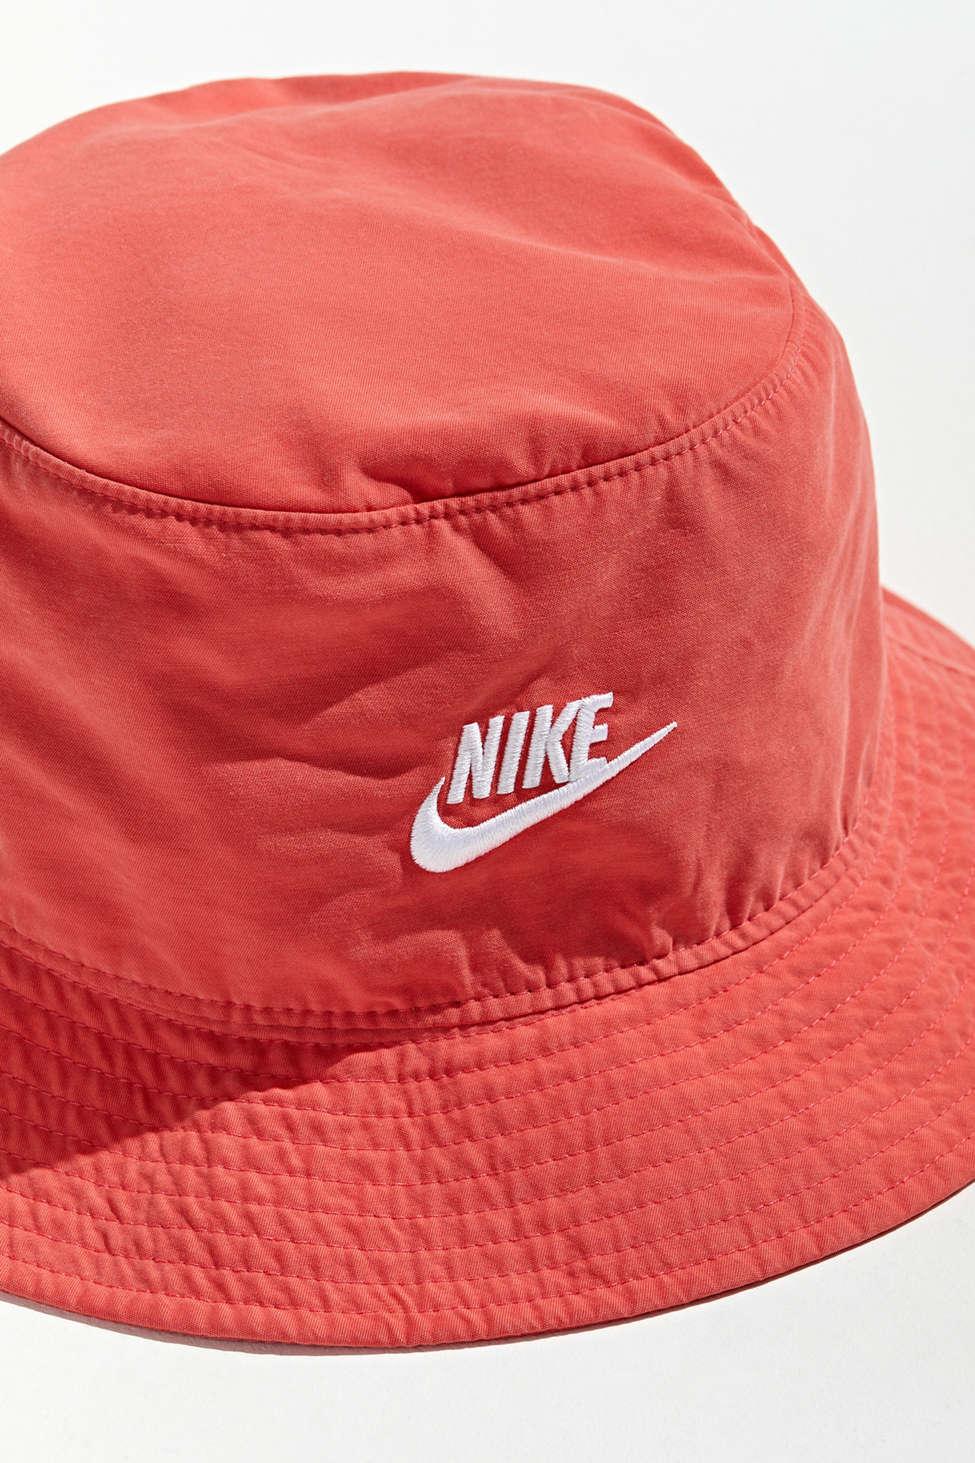 Sale > red bucket hat > in stock